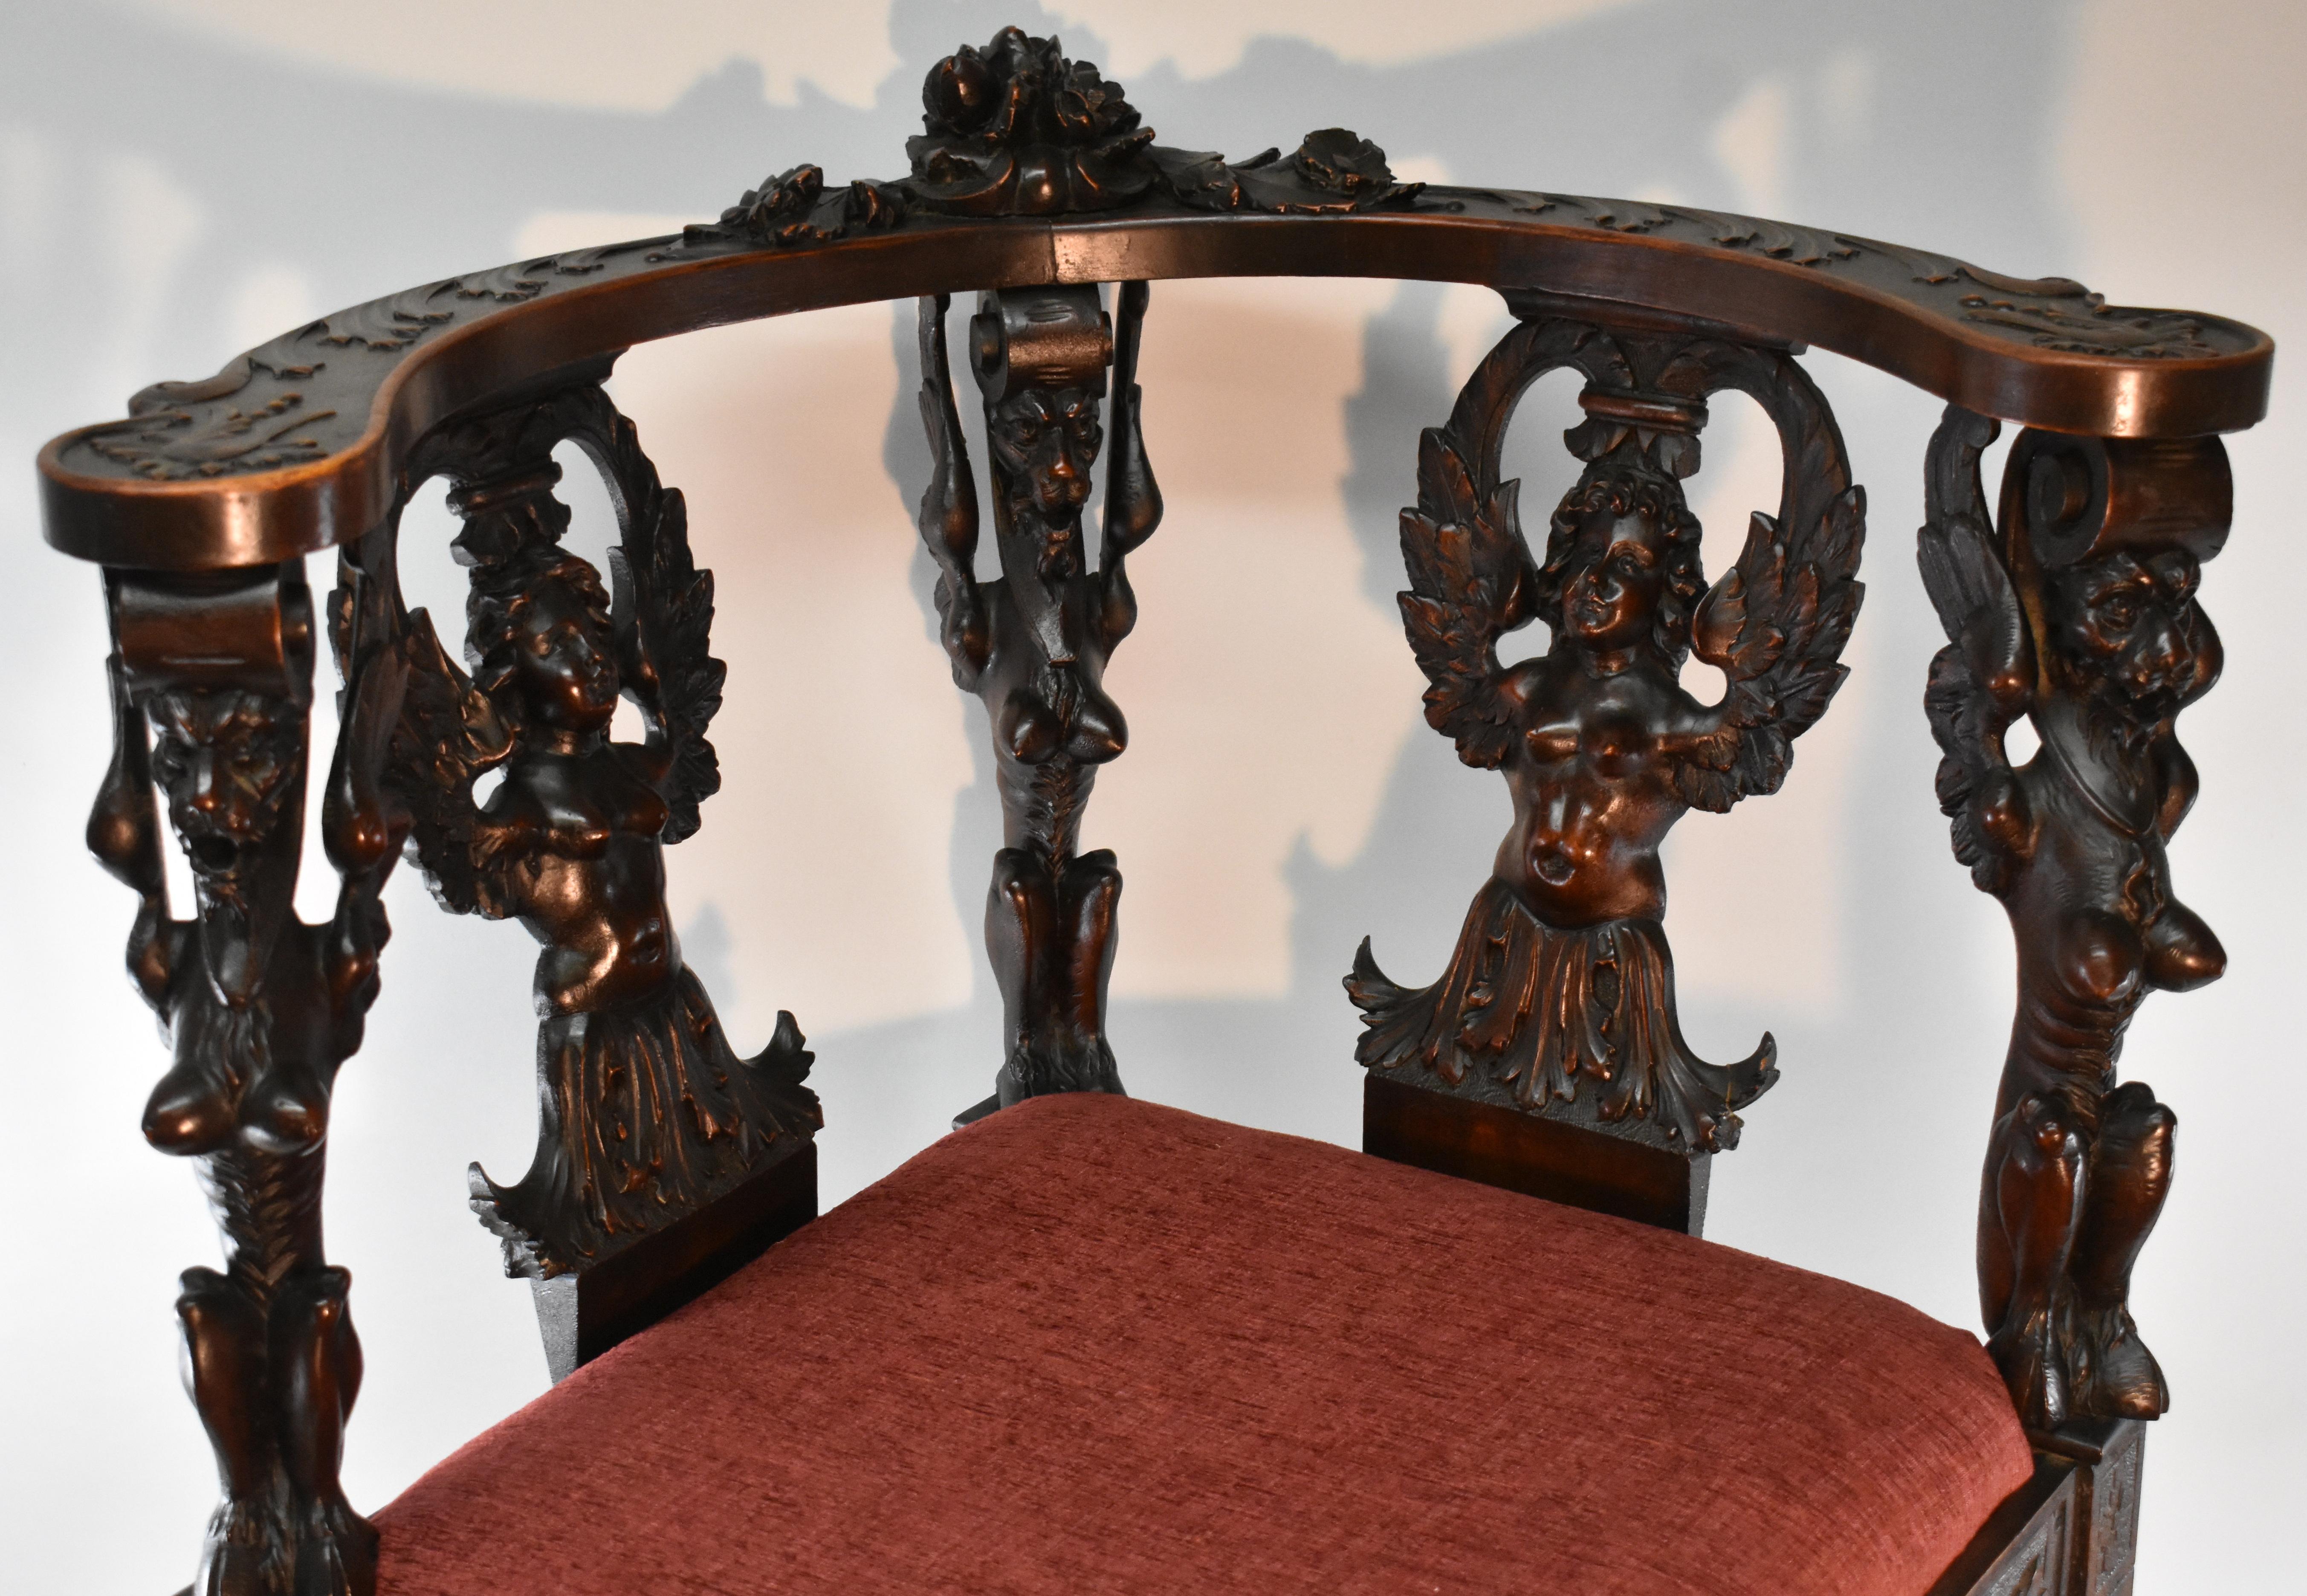 Italian Renaissance style carved mahogany corner chair. High reliefs of angels and griffins. Top of frame has leaf carvings and center floral group. Spindle legs are heavily carved. Original finish and condition with wonderful patina. Very nice